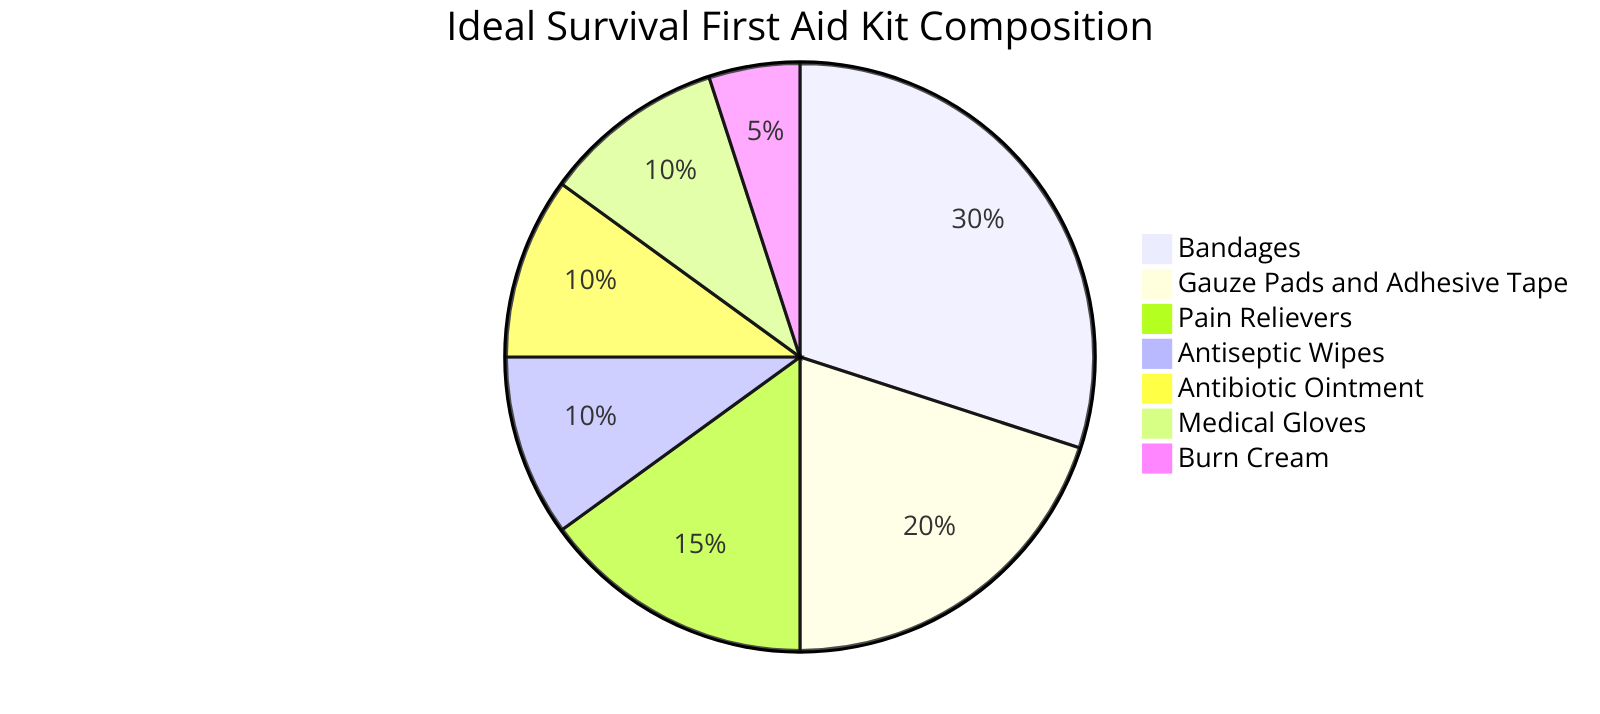 pie-chart diagram illustrating the composition of an ideal survival first aid kit